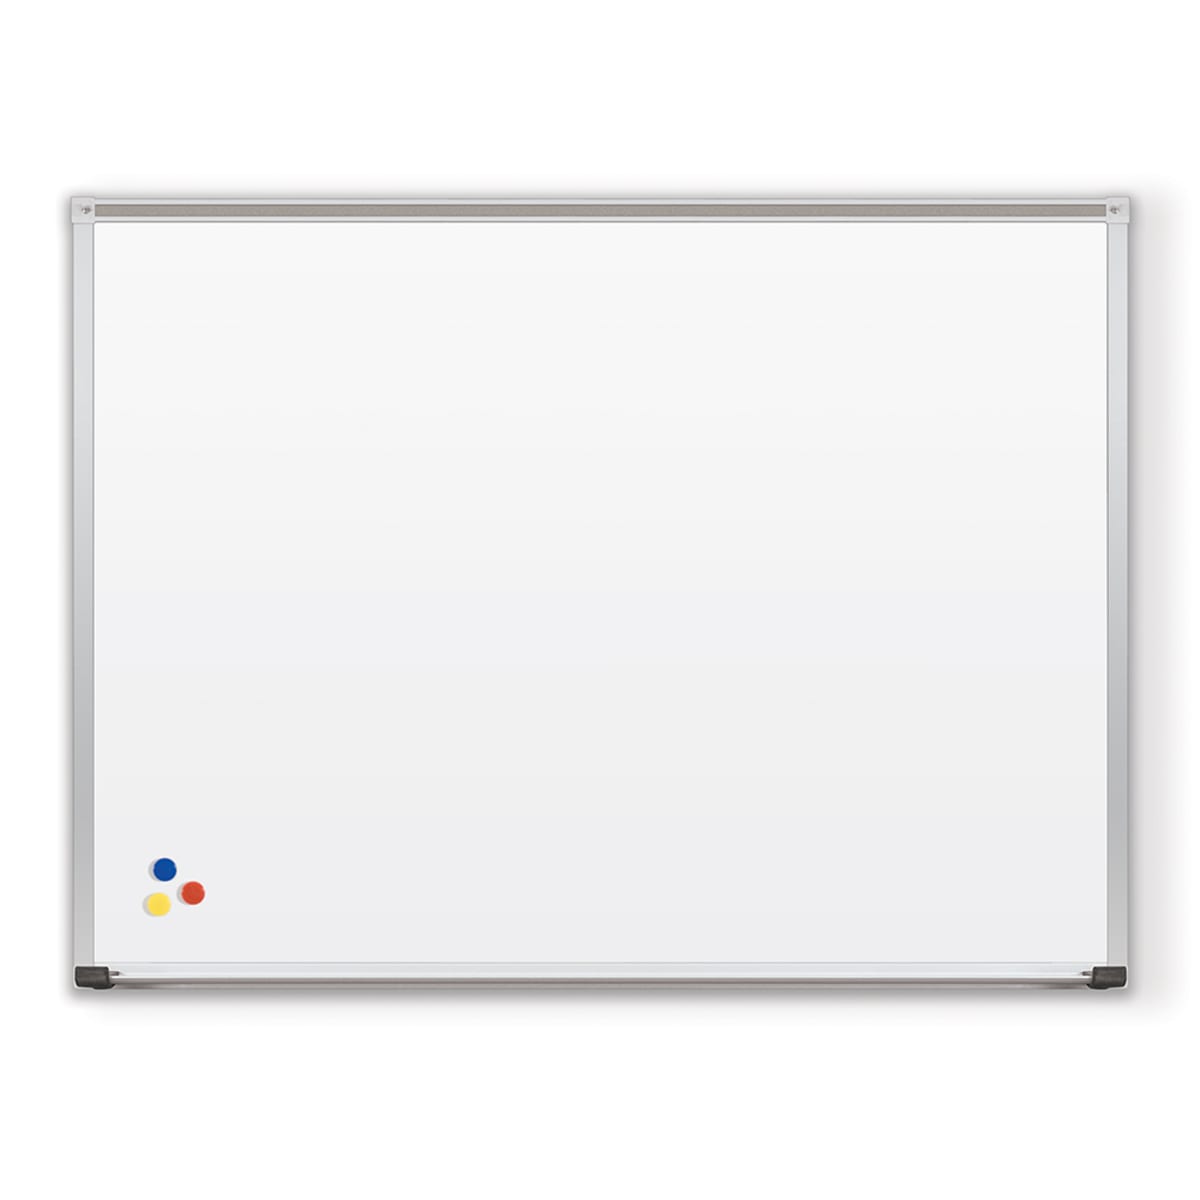 Mooreco Porcelain Markerboard with Deluxe Aluminum Trim - 4'H x 16'W (Mooreco 202AP) - SchoolOutlet